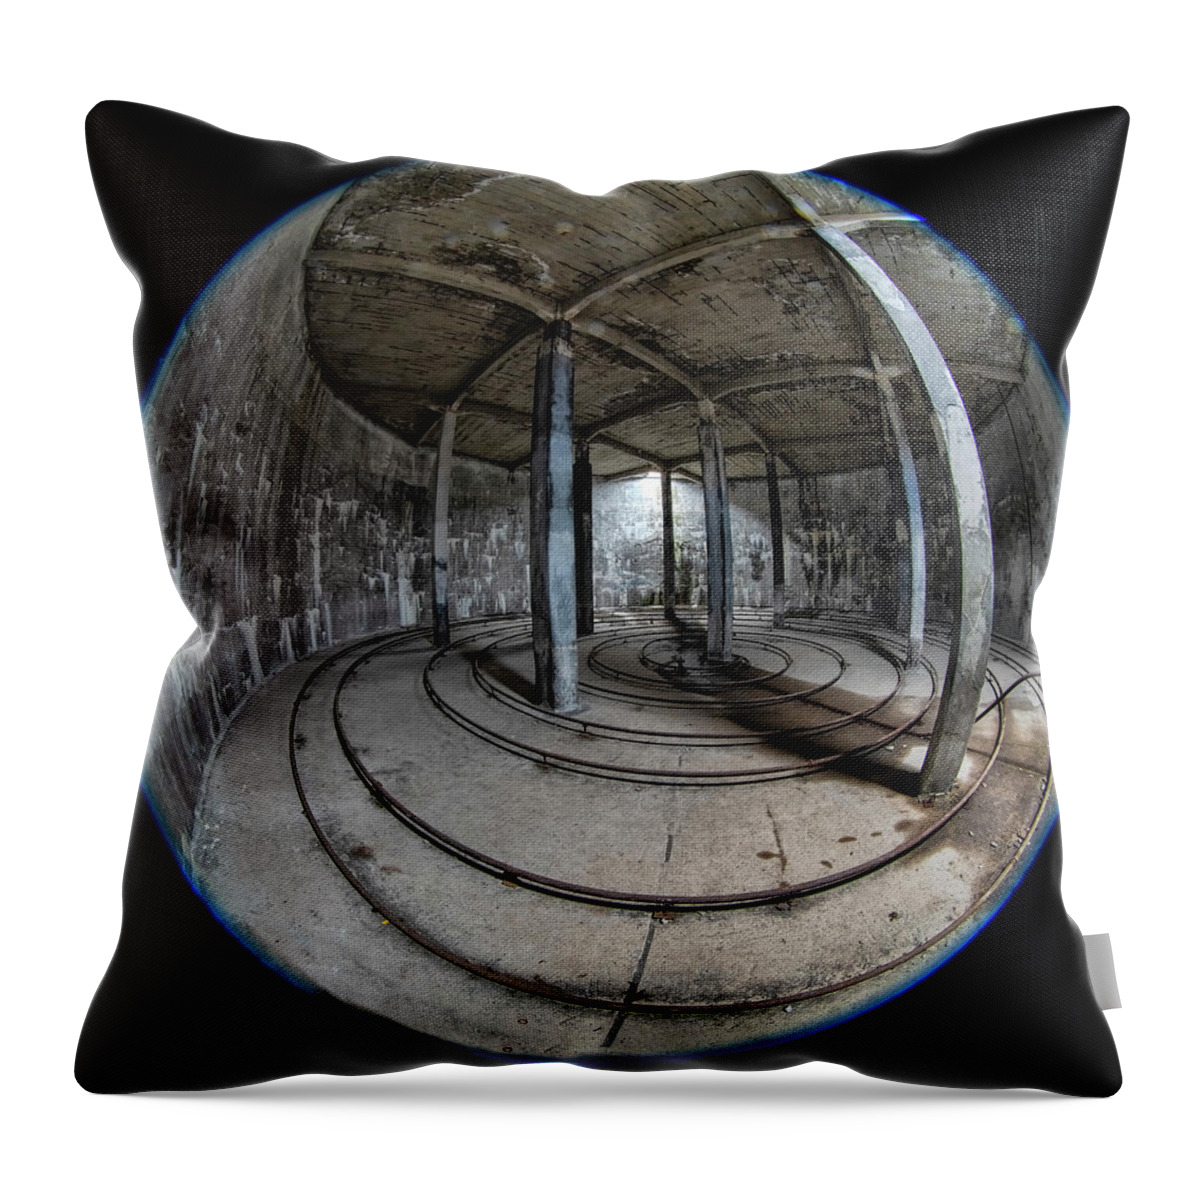 Iceland Throw Pillow featuring the photograph Djupavik Cannery Herring Oil Tank by Tom Singleton